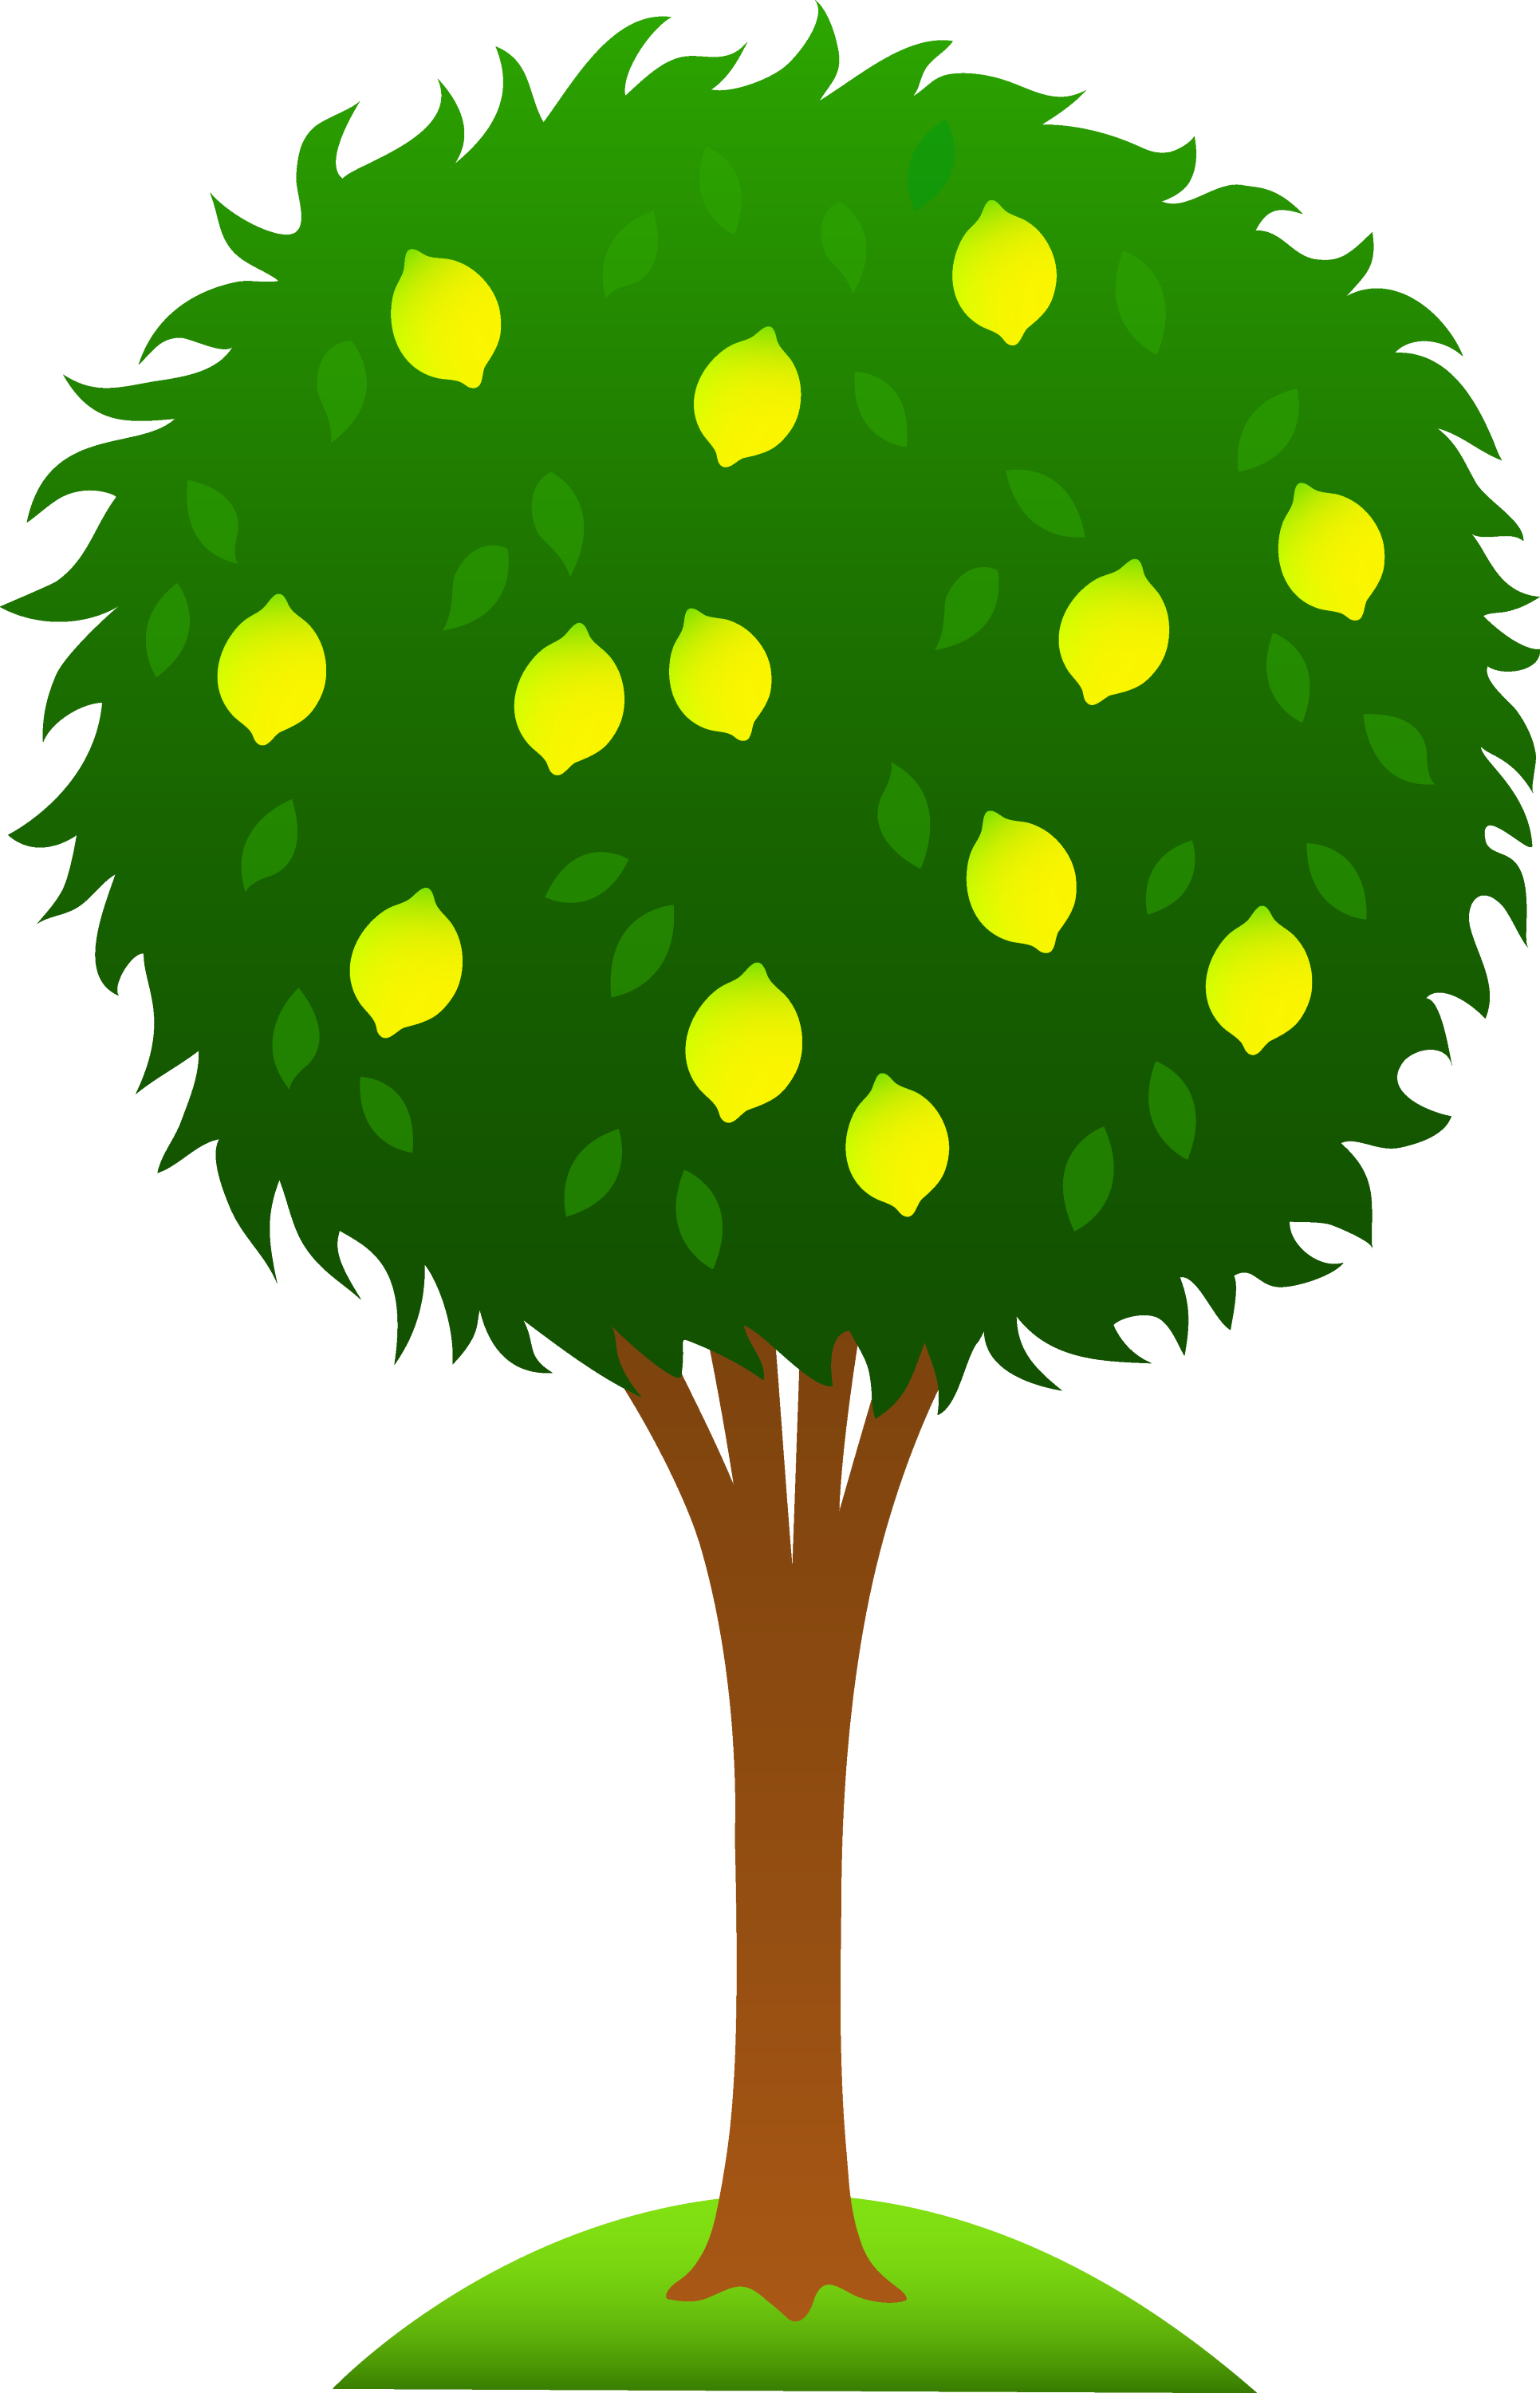 free clipart of trees - photo #38